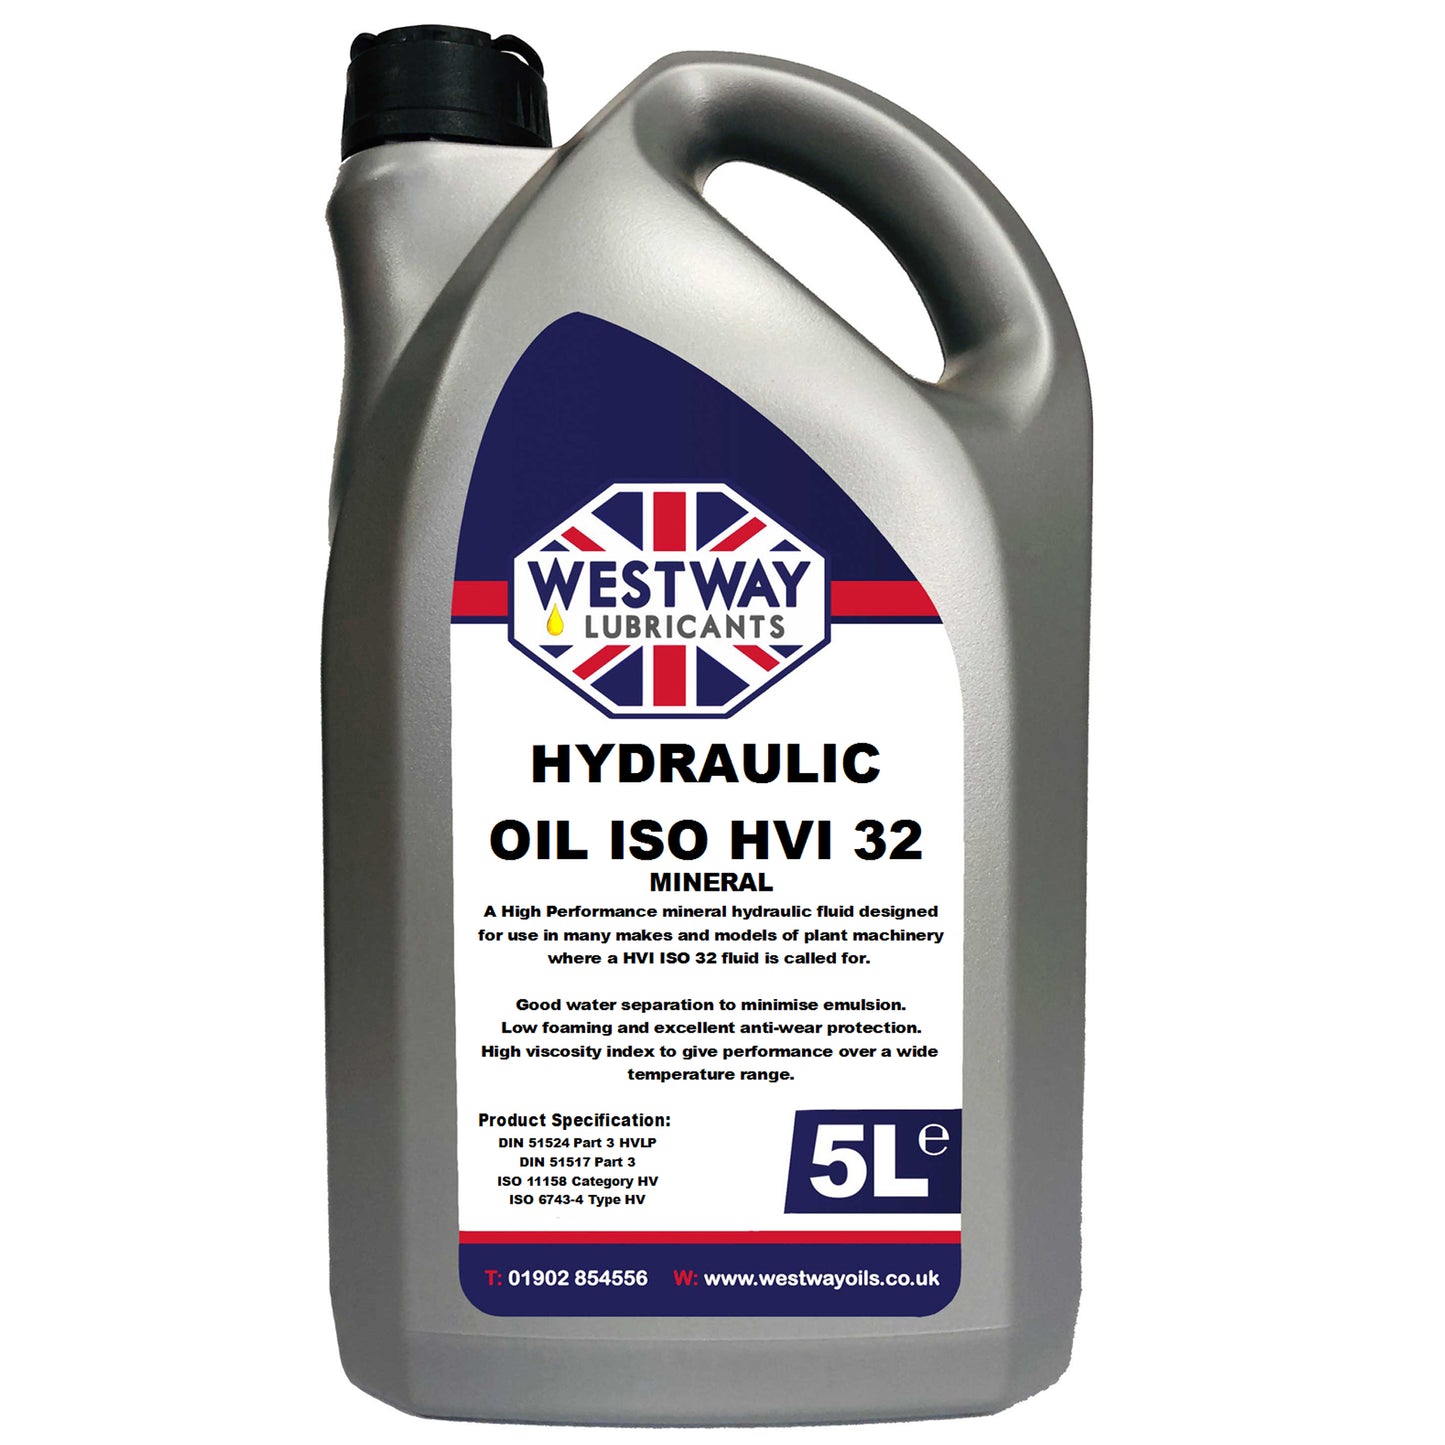 Hydraulic Oil ISO HVI 32 High Viscosity Index Mineral Oil